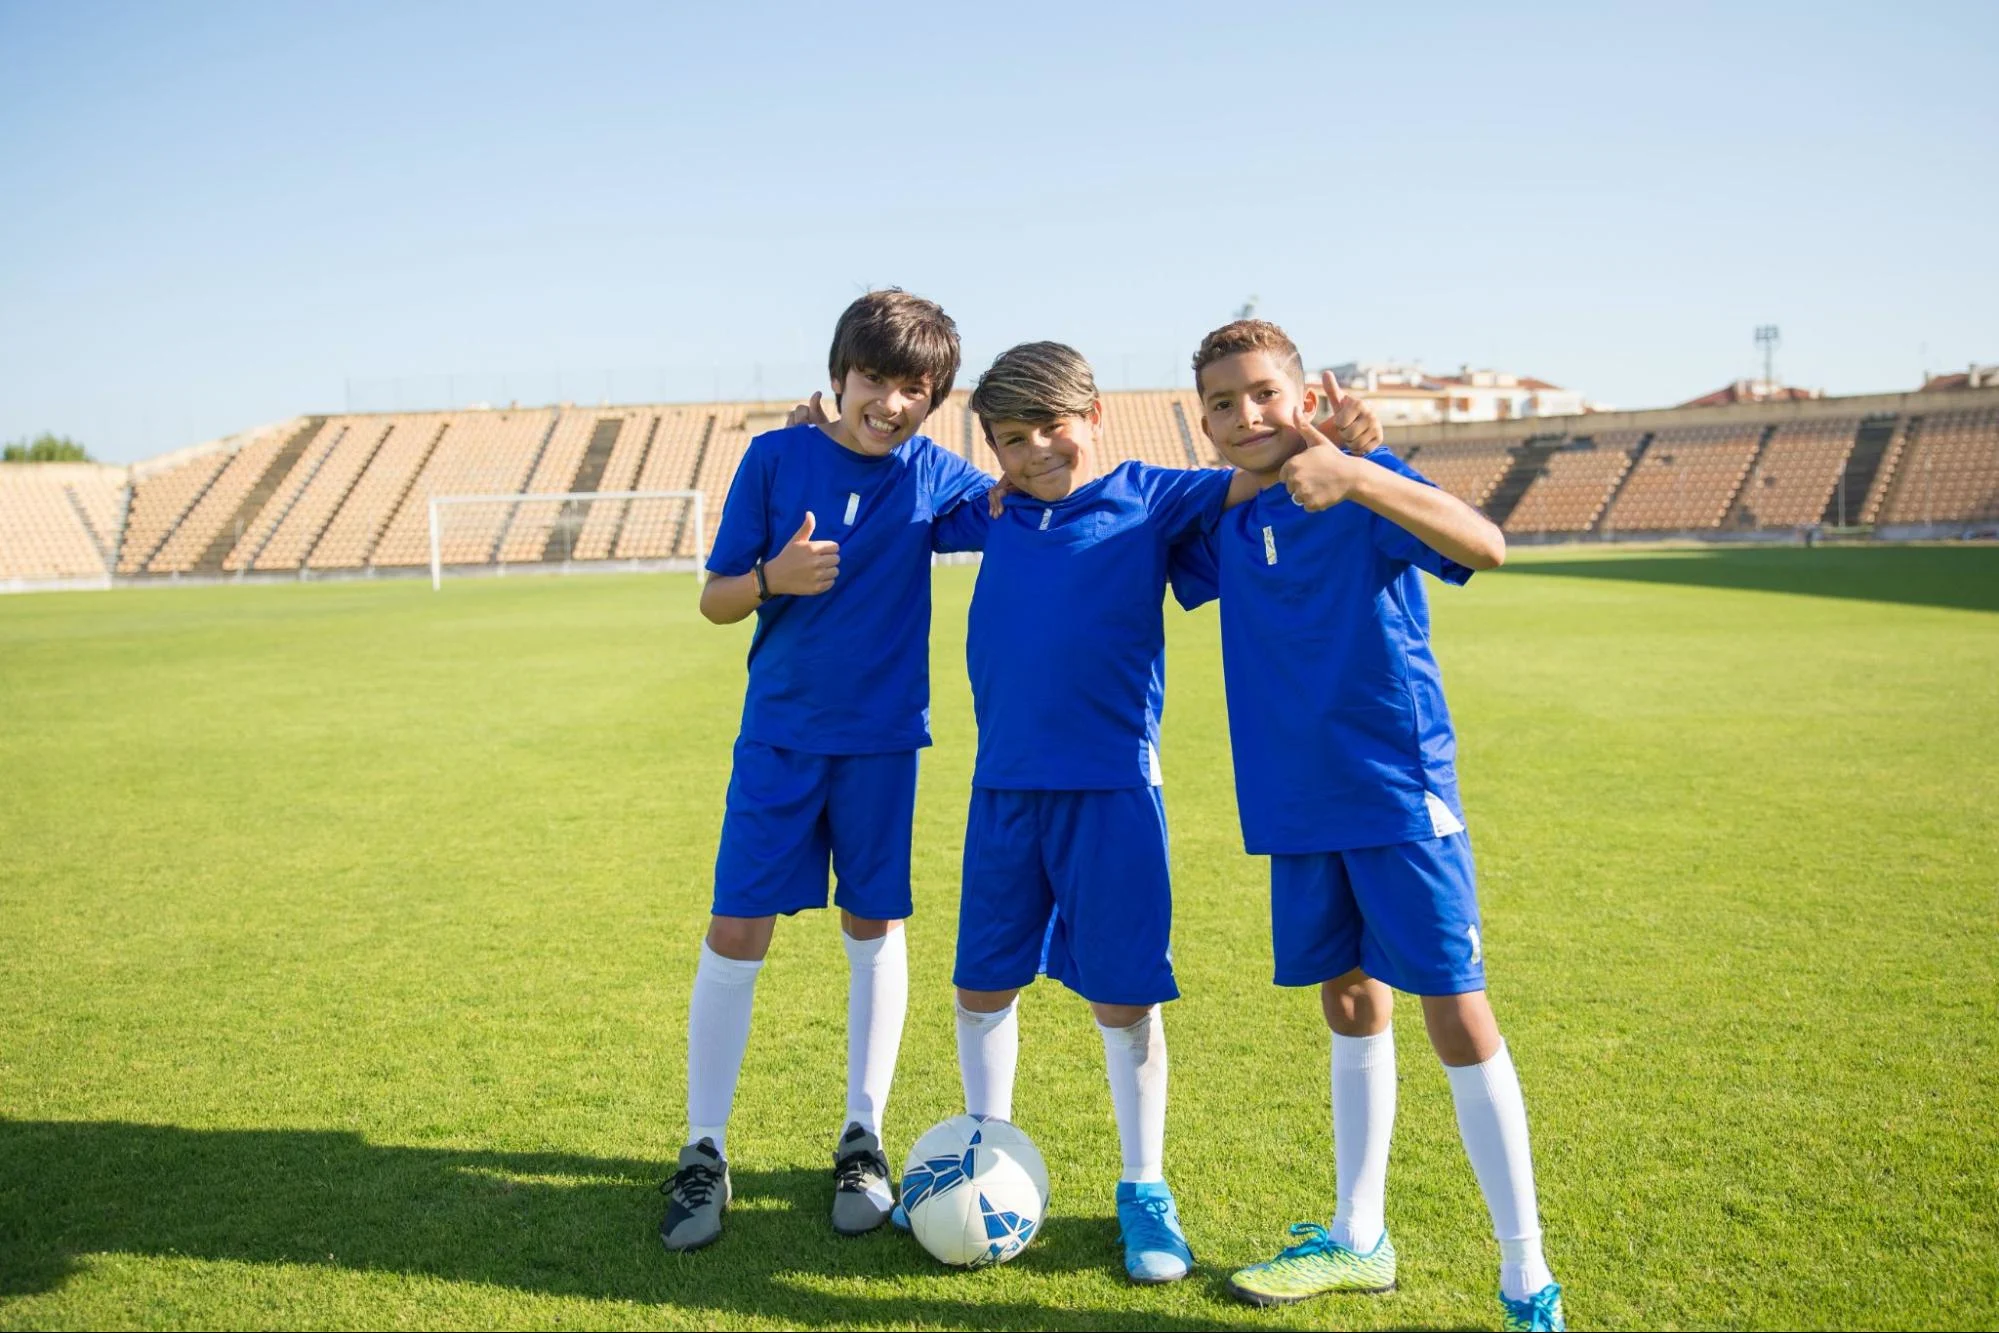 Three youth soccer players giving thumbs up to camera on soccer field